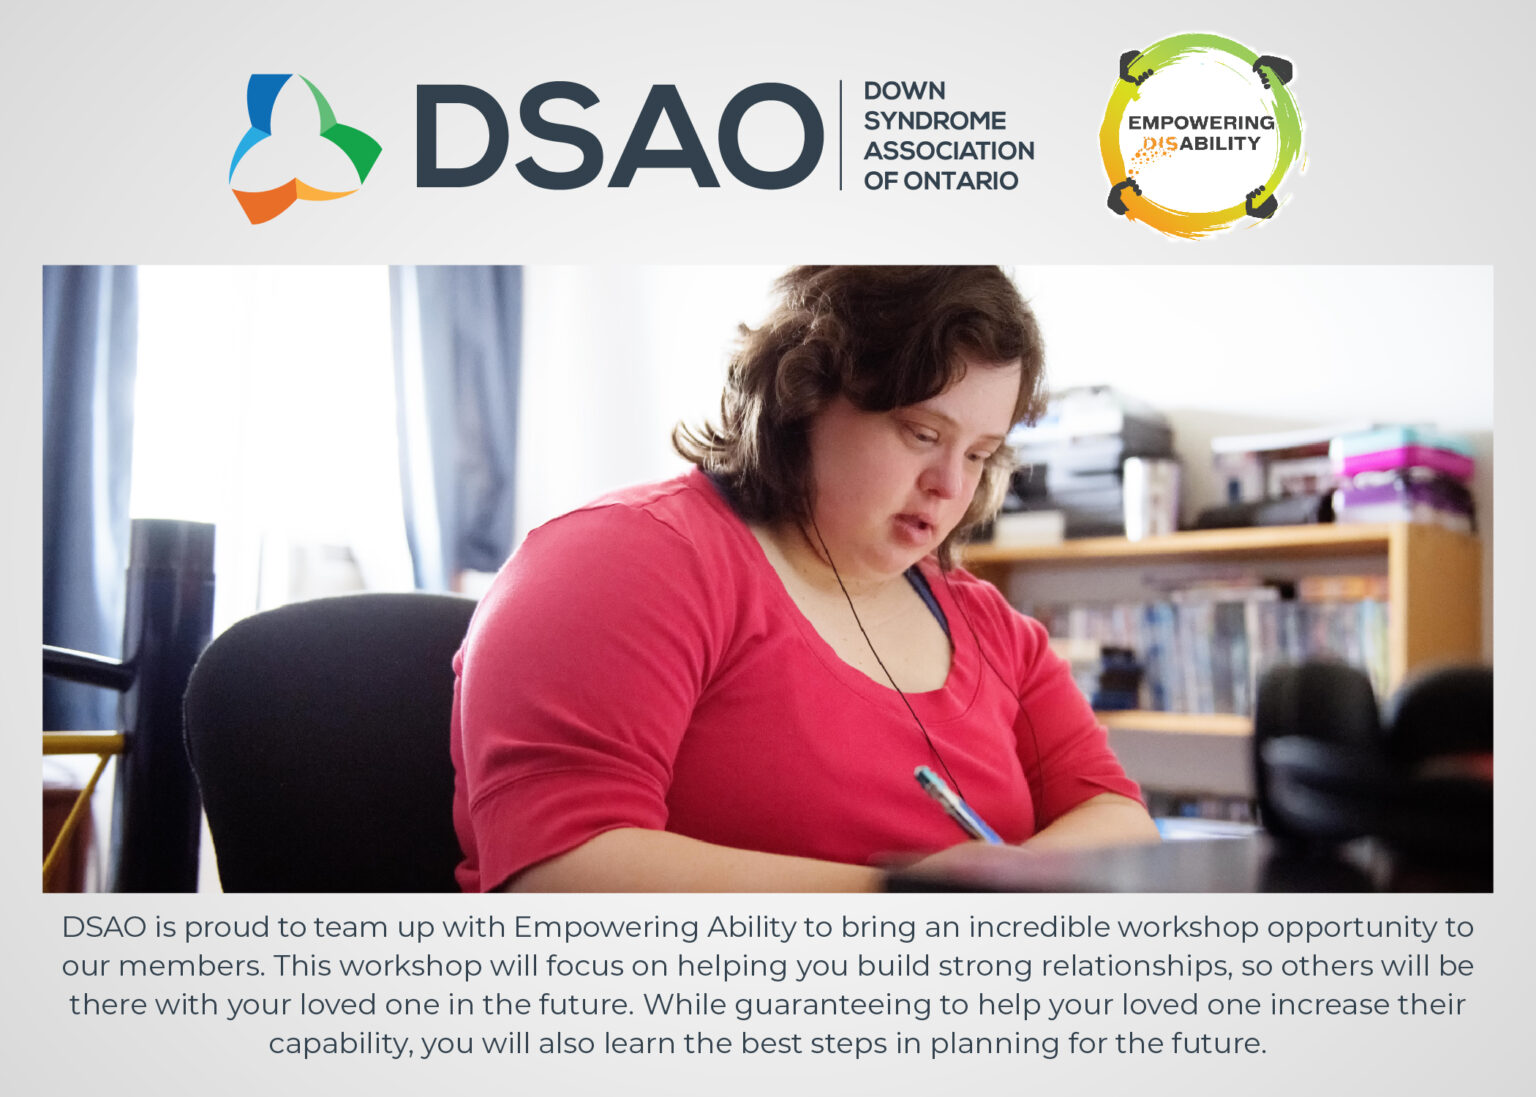 Graphic for free webinar offered by DSAO partnering with Empowering Ability